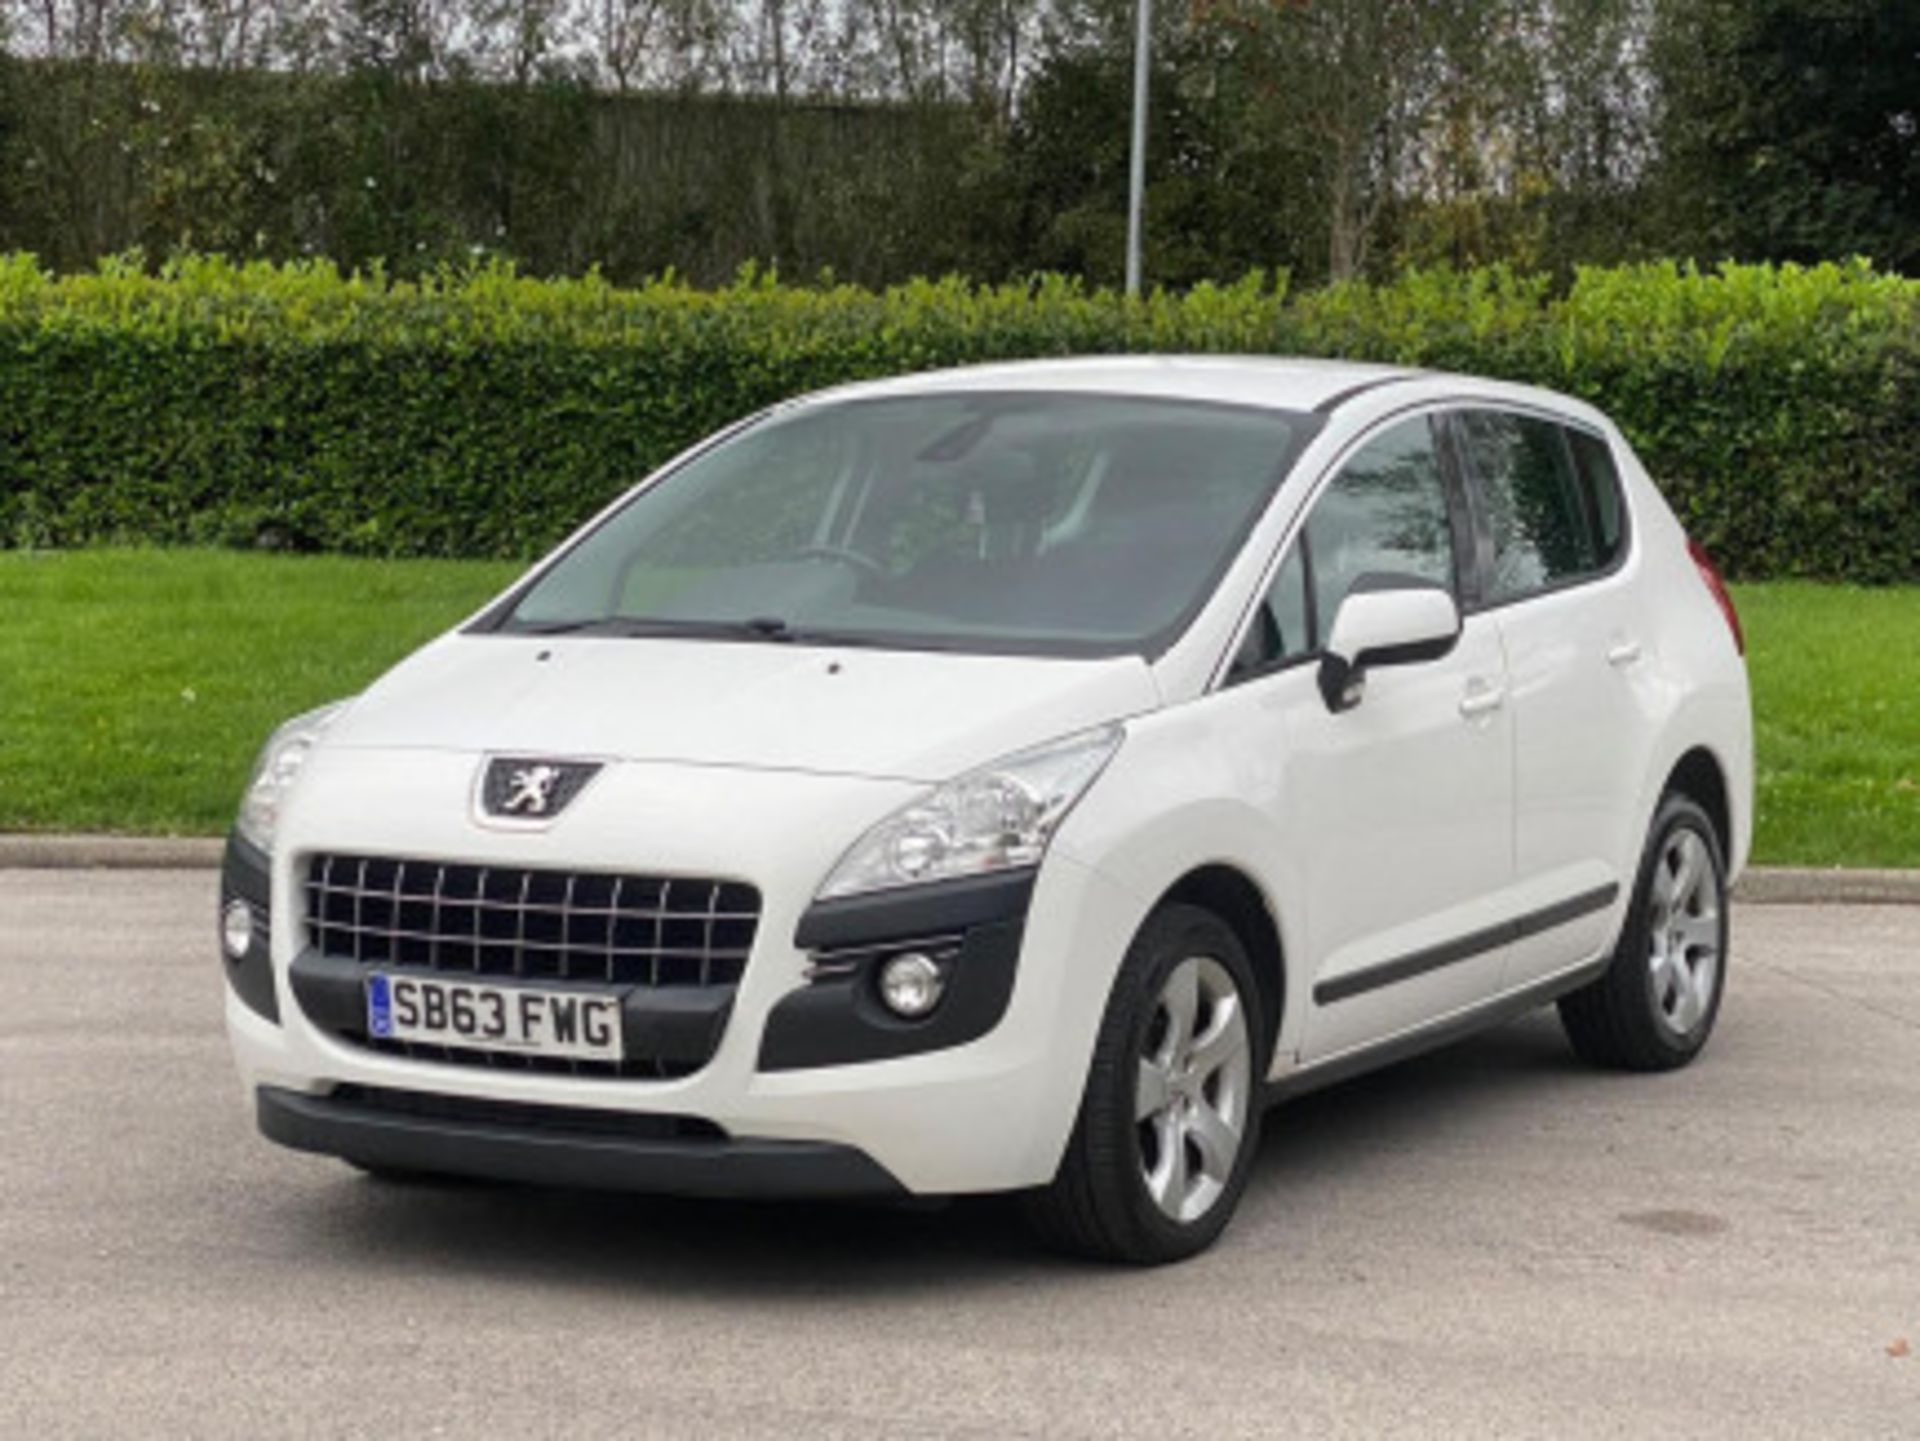 2013 PEUGEOT 3008 1.6 HDI ACTIVE >>--NO VAT ON HAMMER--<< - Image 54 of 110